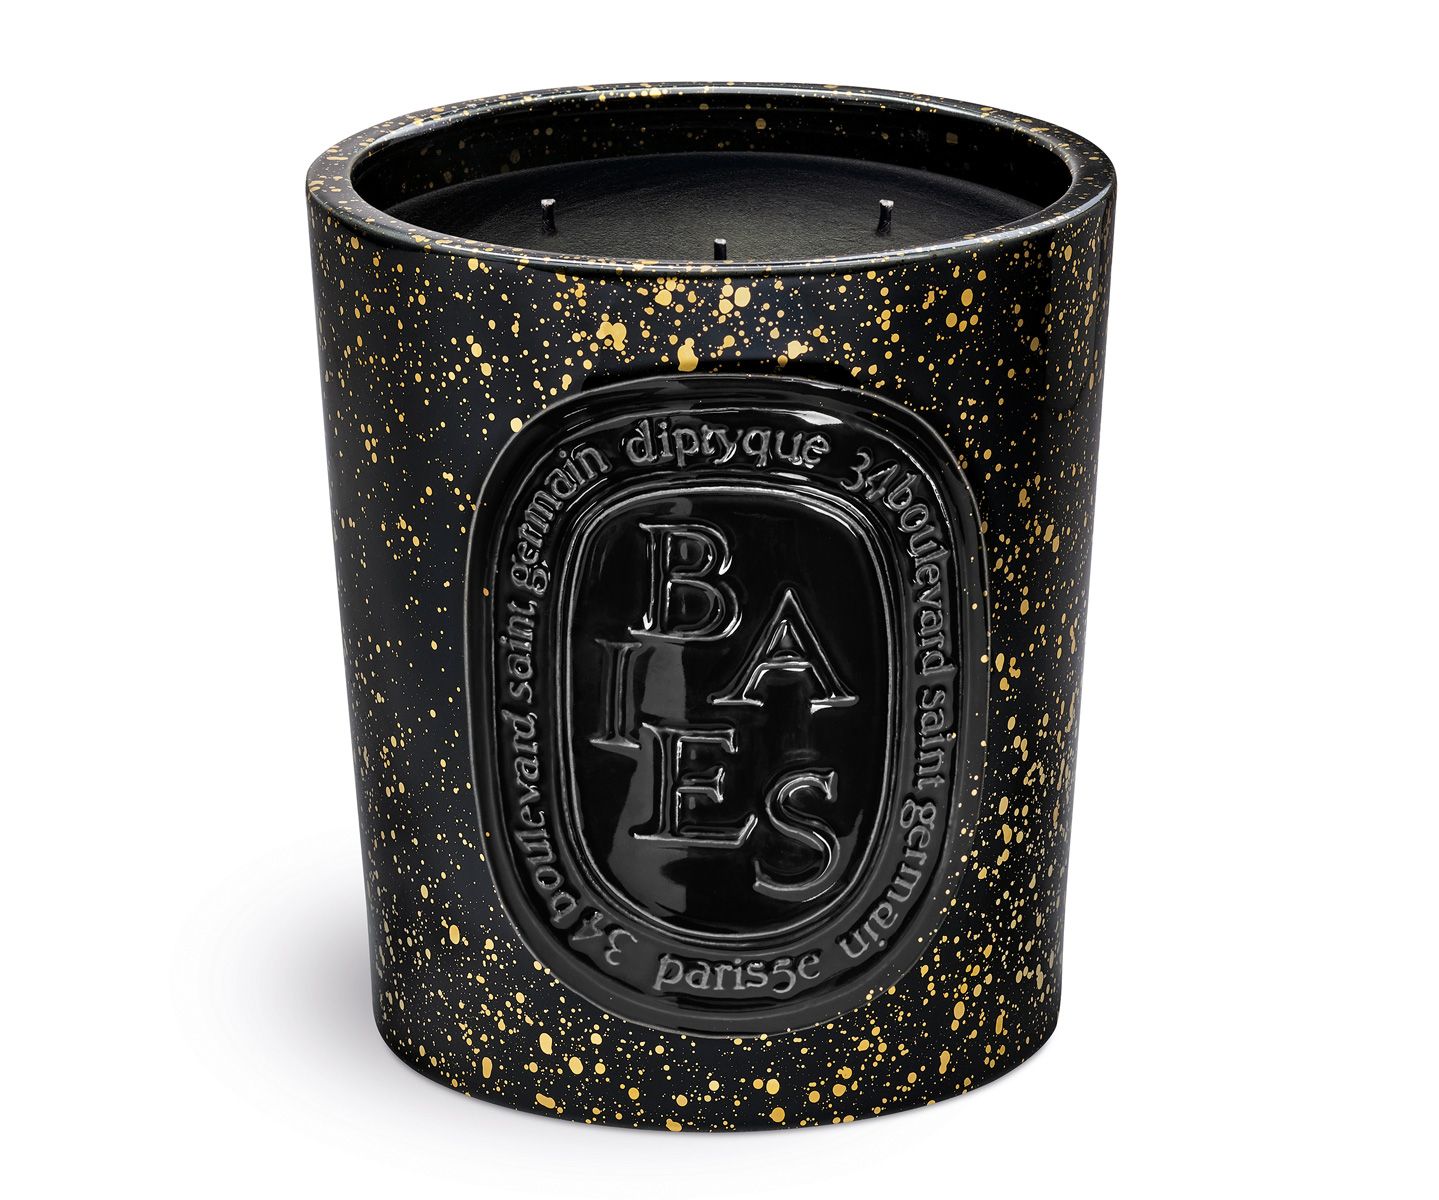 Baies / Berries candle 1.5kg – Limited Edition | diptyque (US)